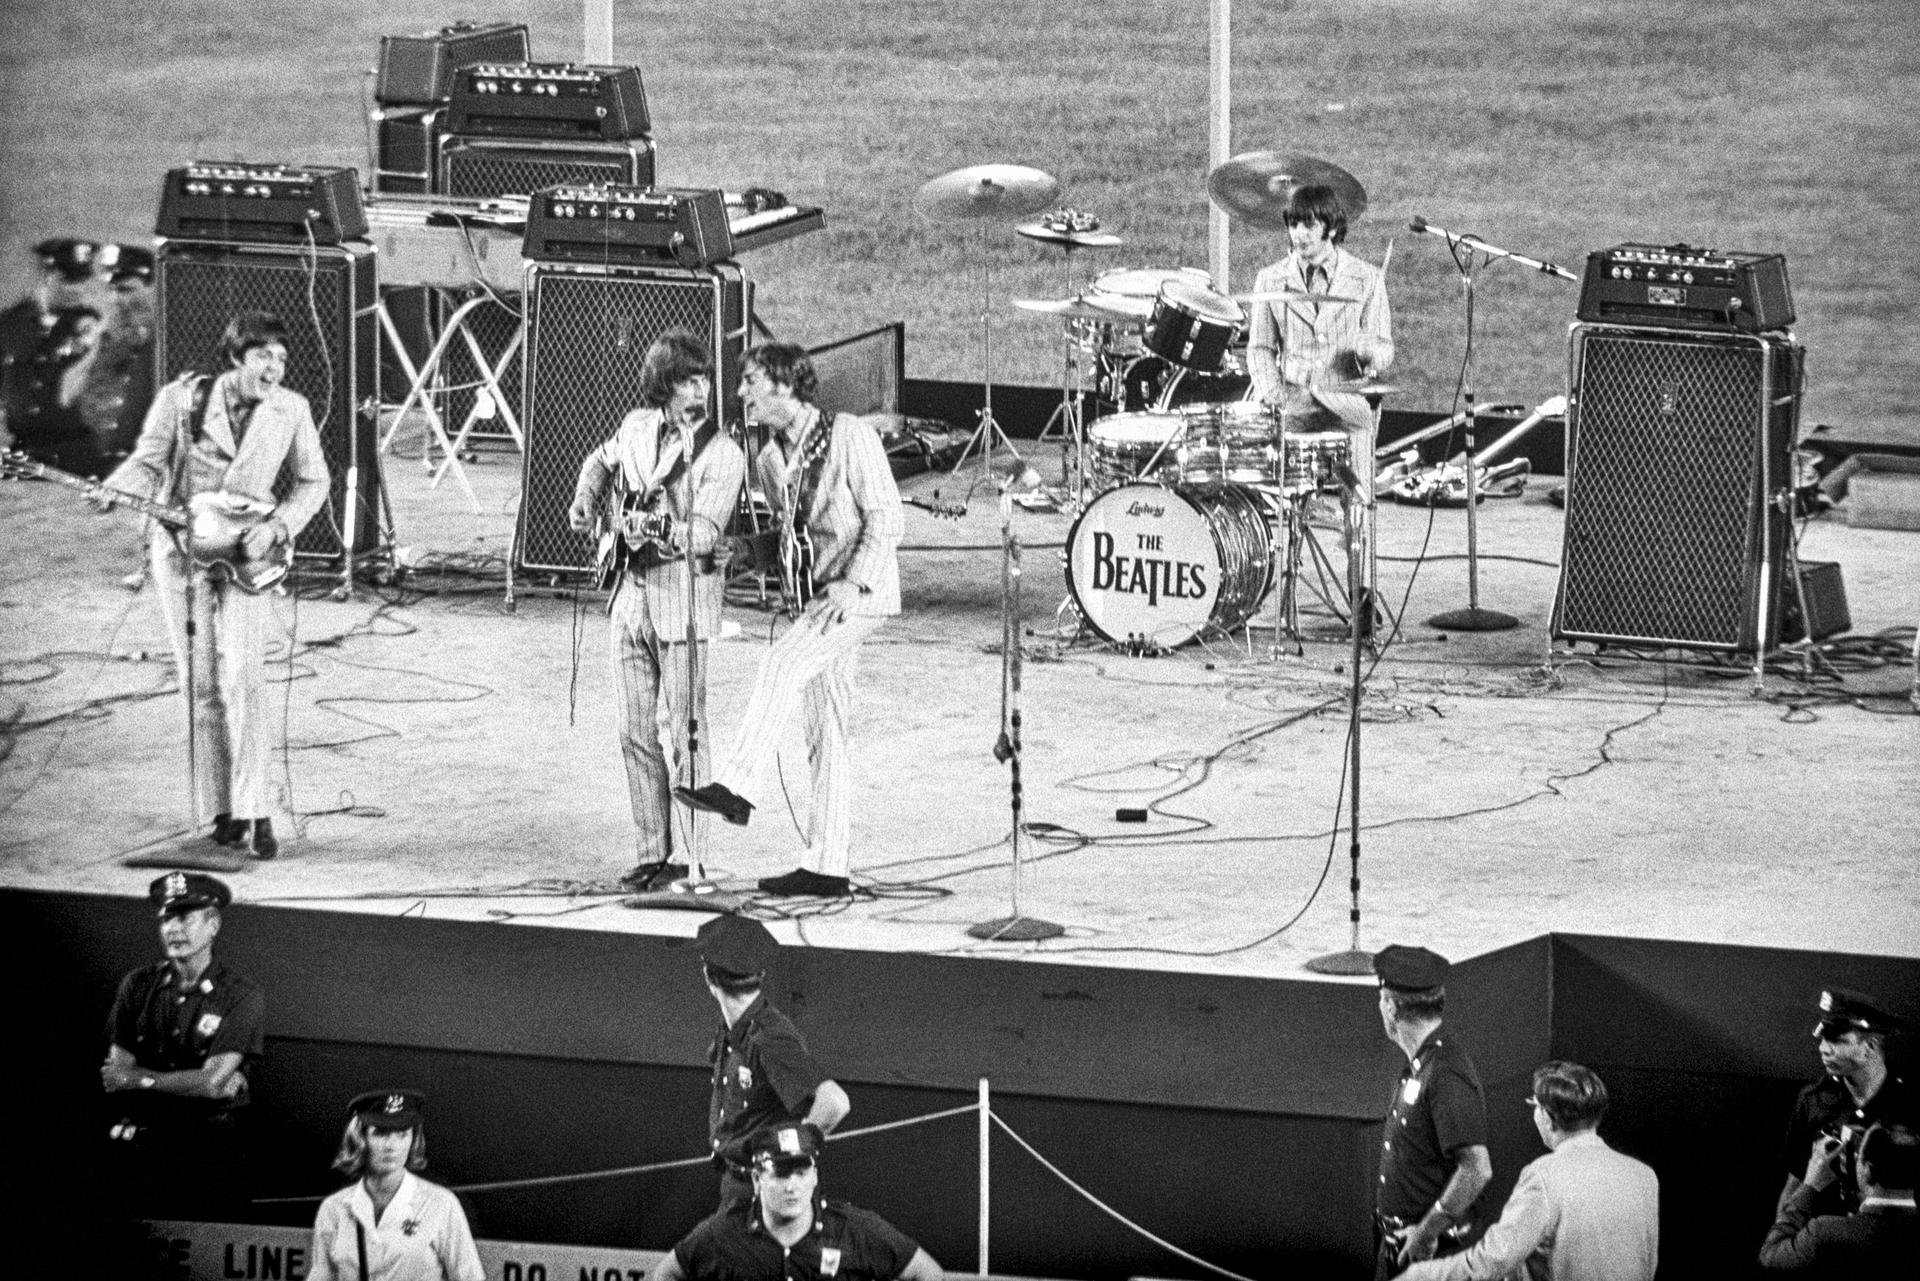 The Beatles at Shea Stadium in New York, a concert that showed that large-scale outdoor performances could succeed. Photos: Corbis